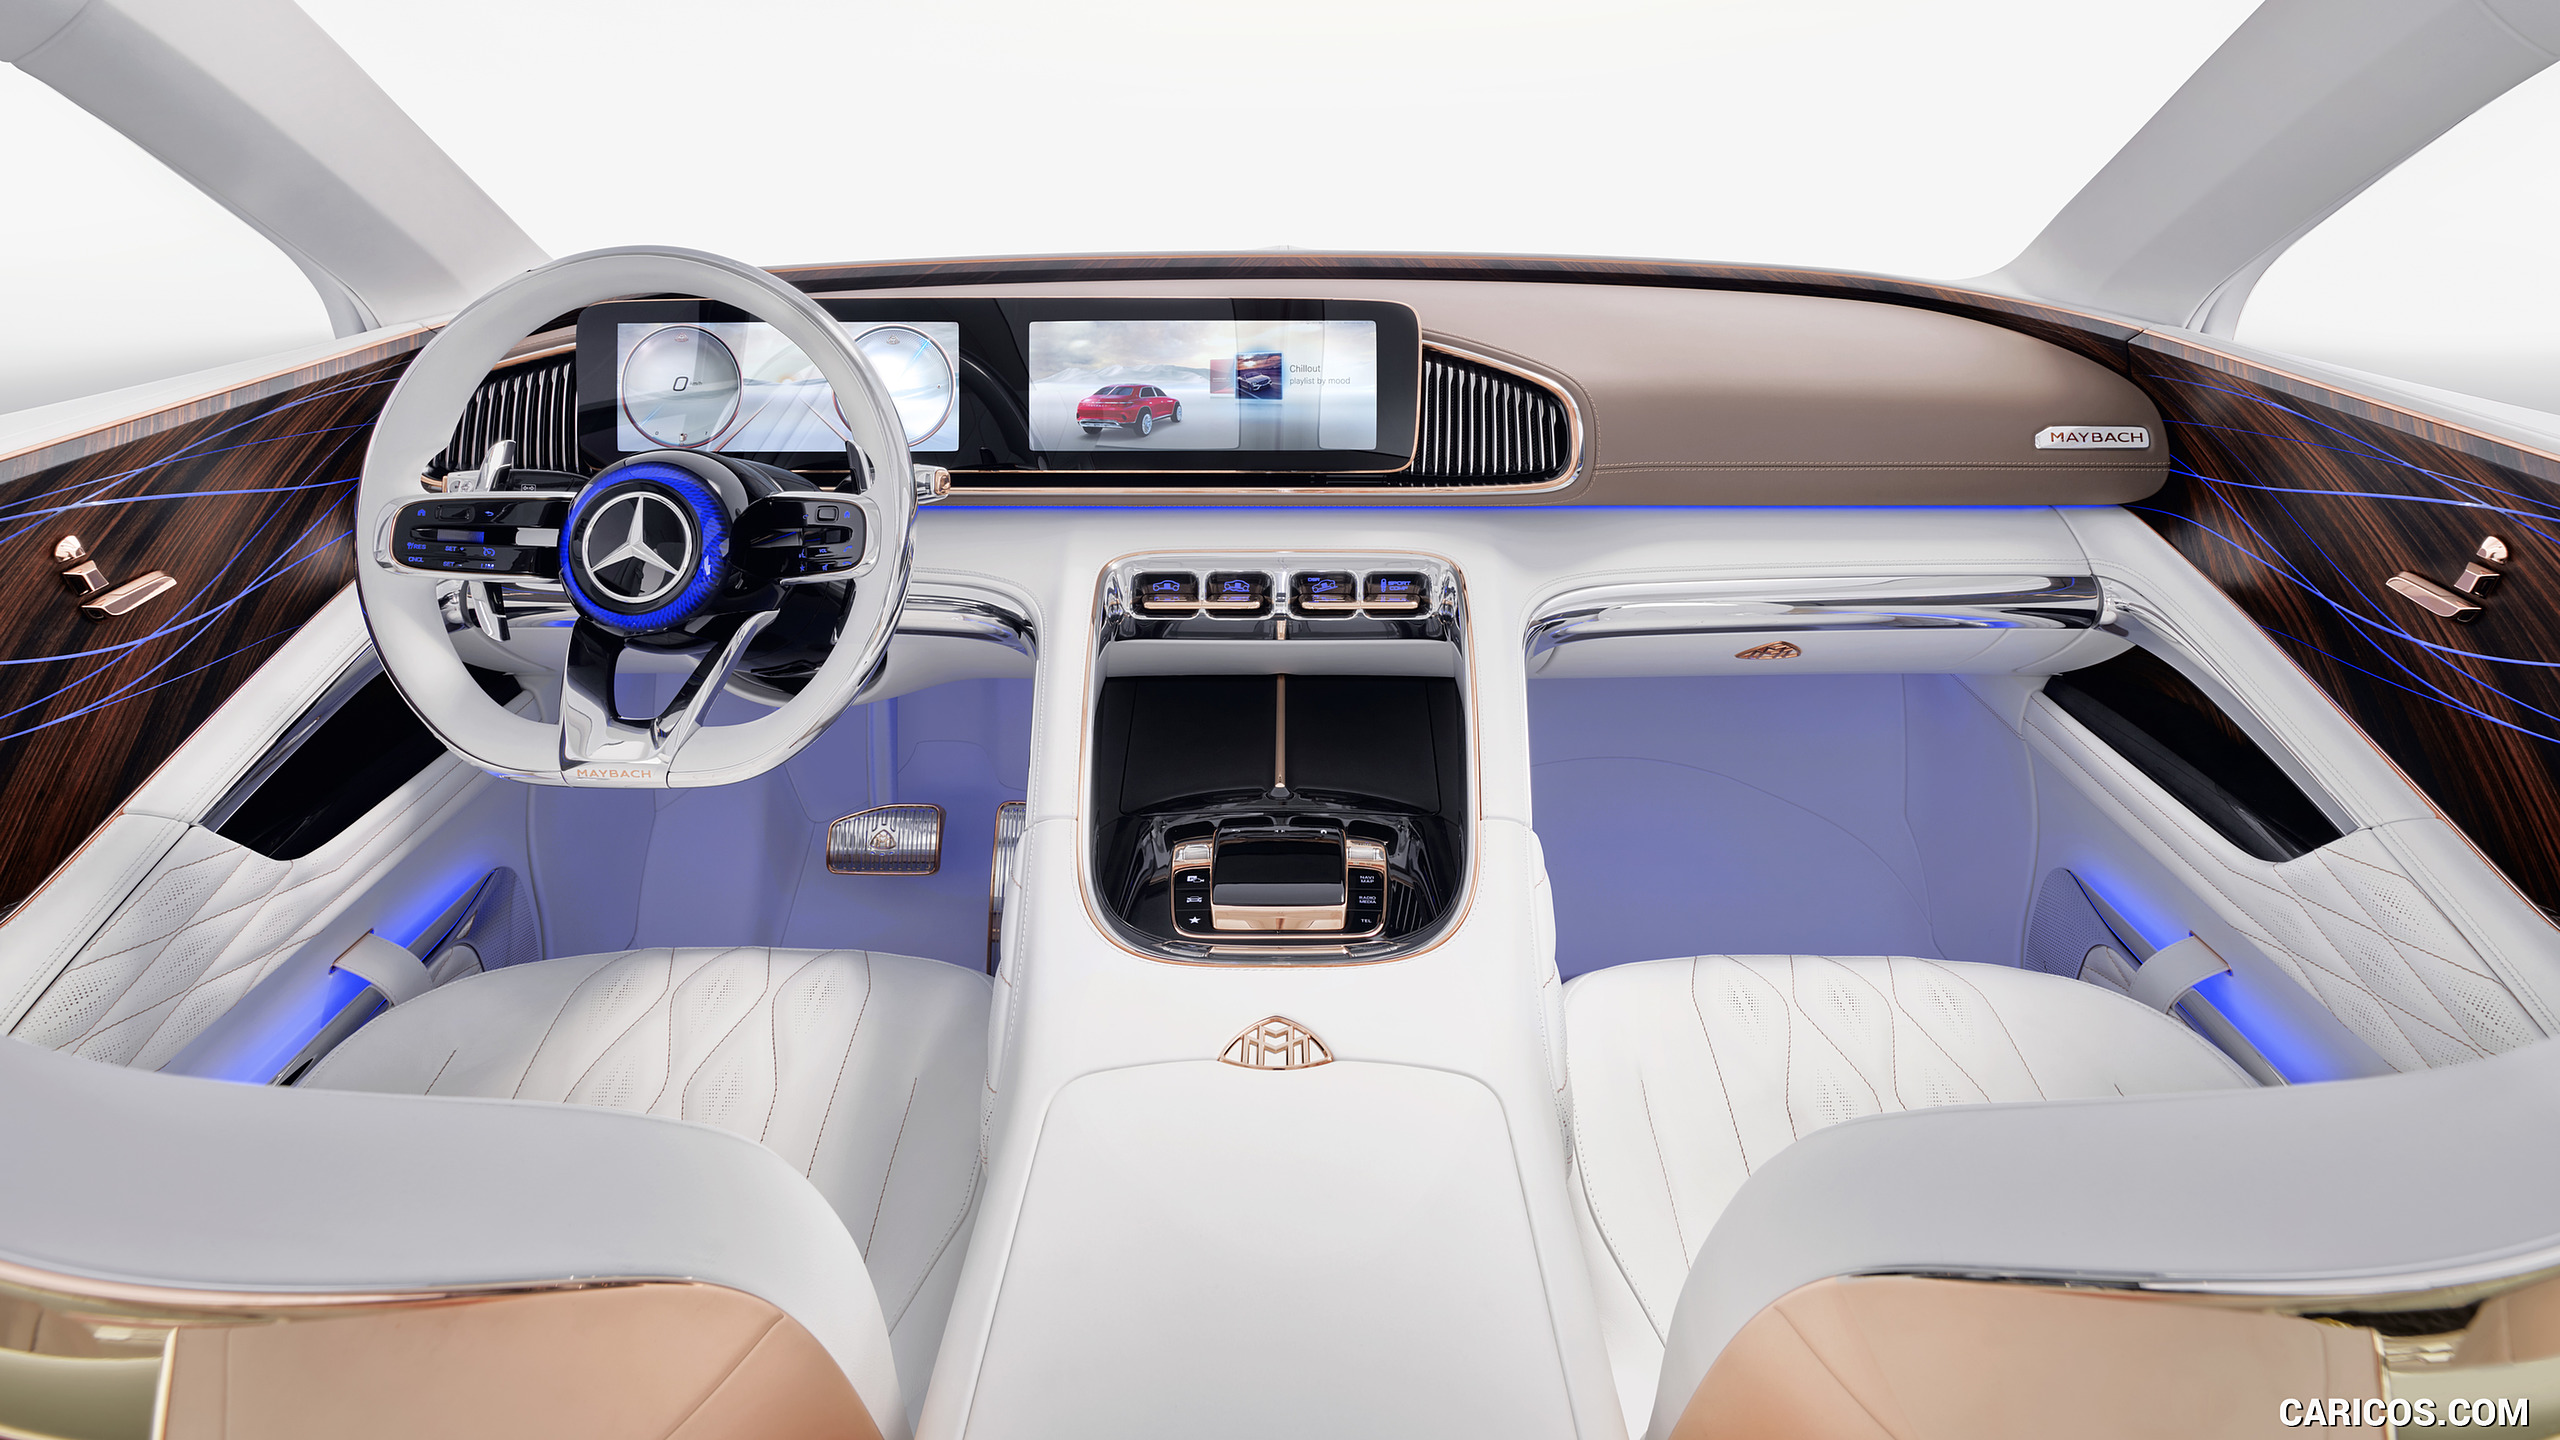 2018 Mercedes-Maybach Vision Ultimate Luxury SUV Concept - Interior, Cockpit, #33 of 41